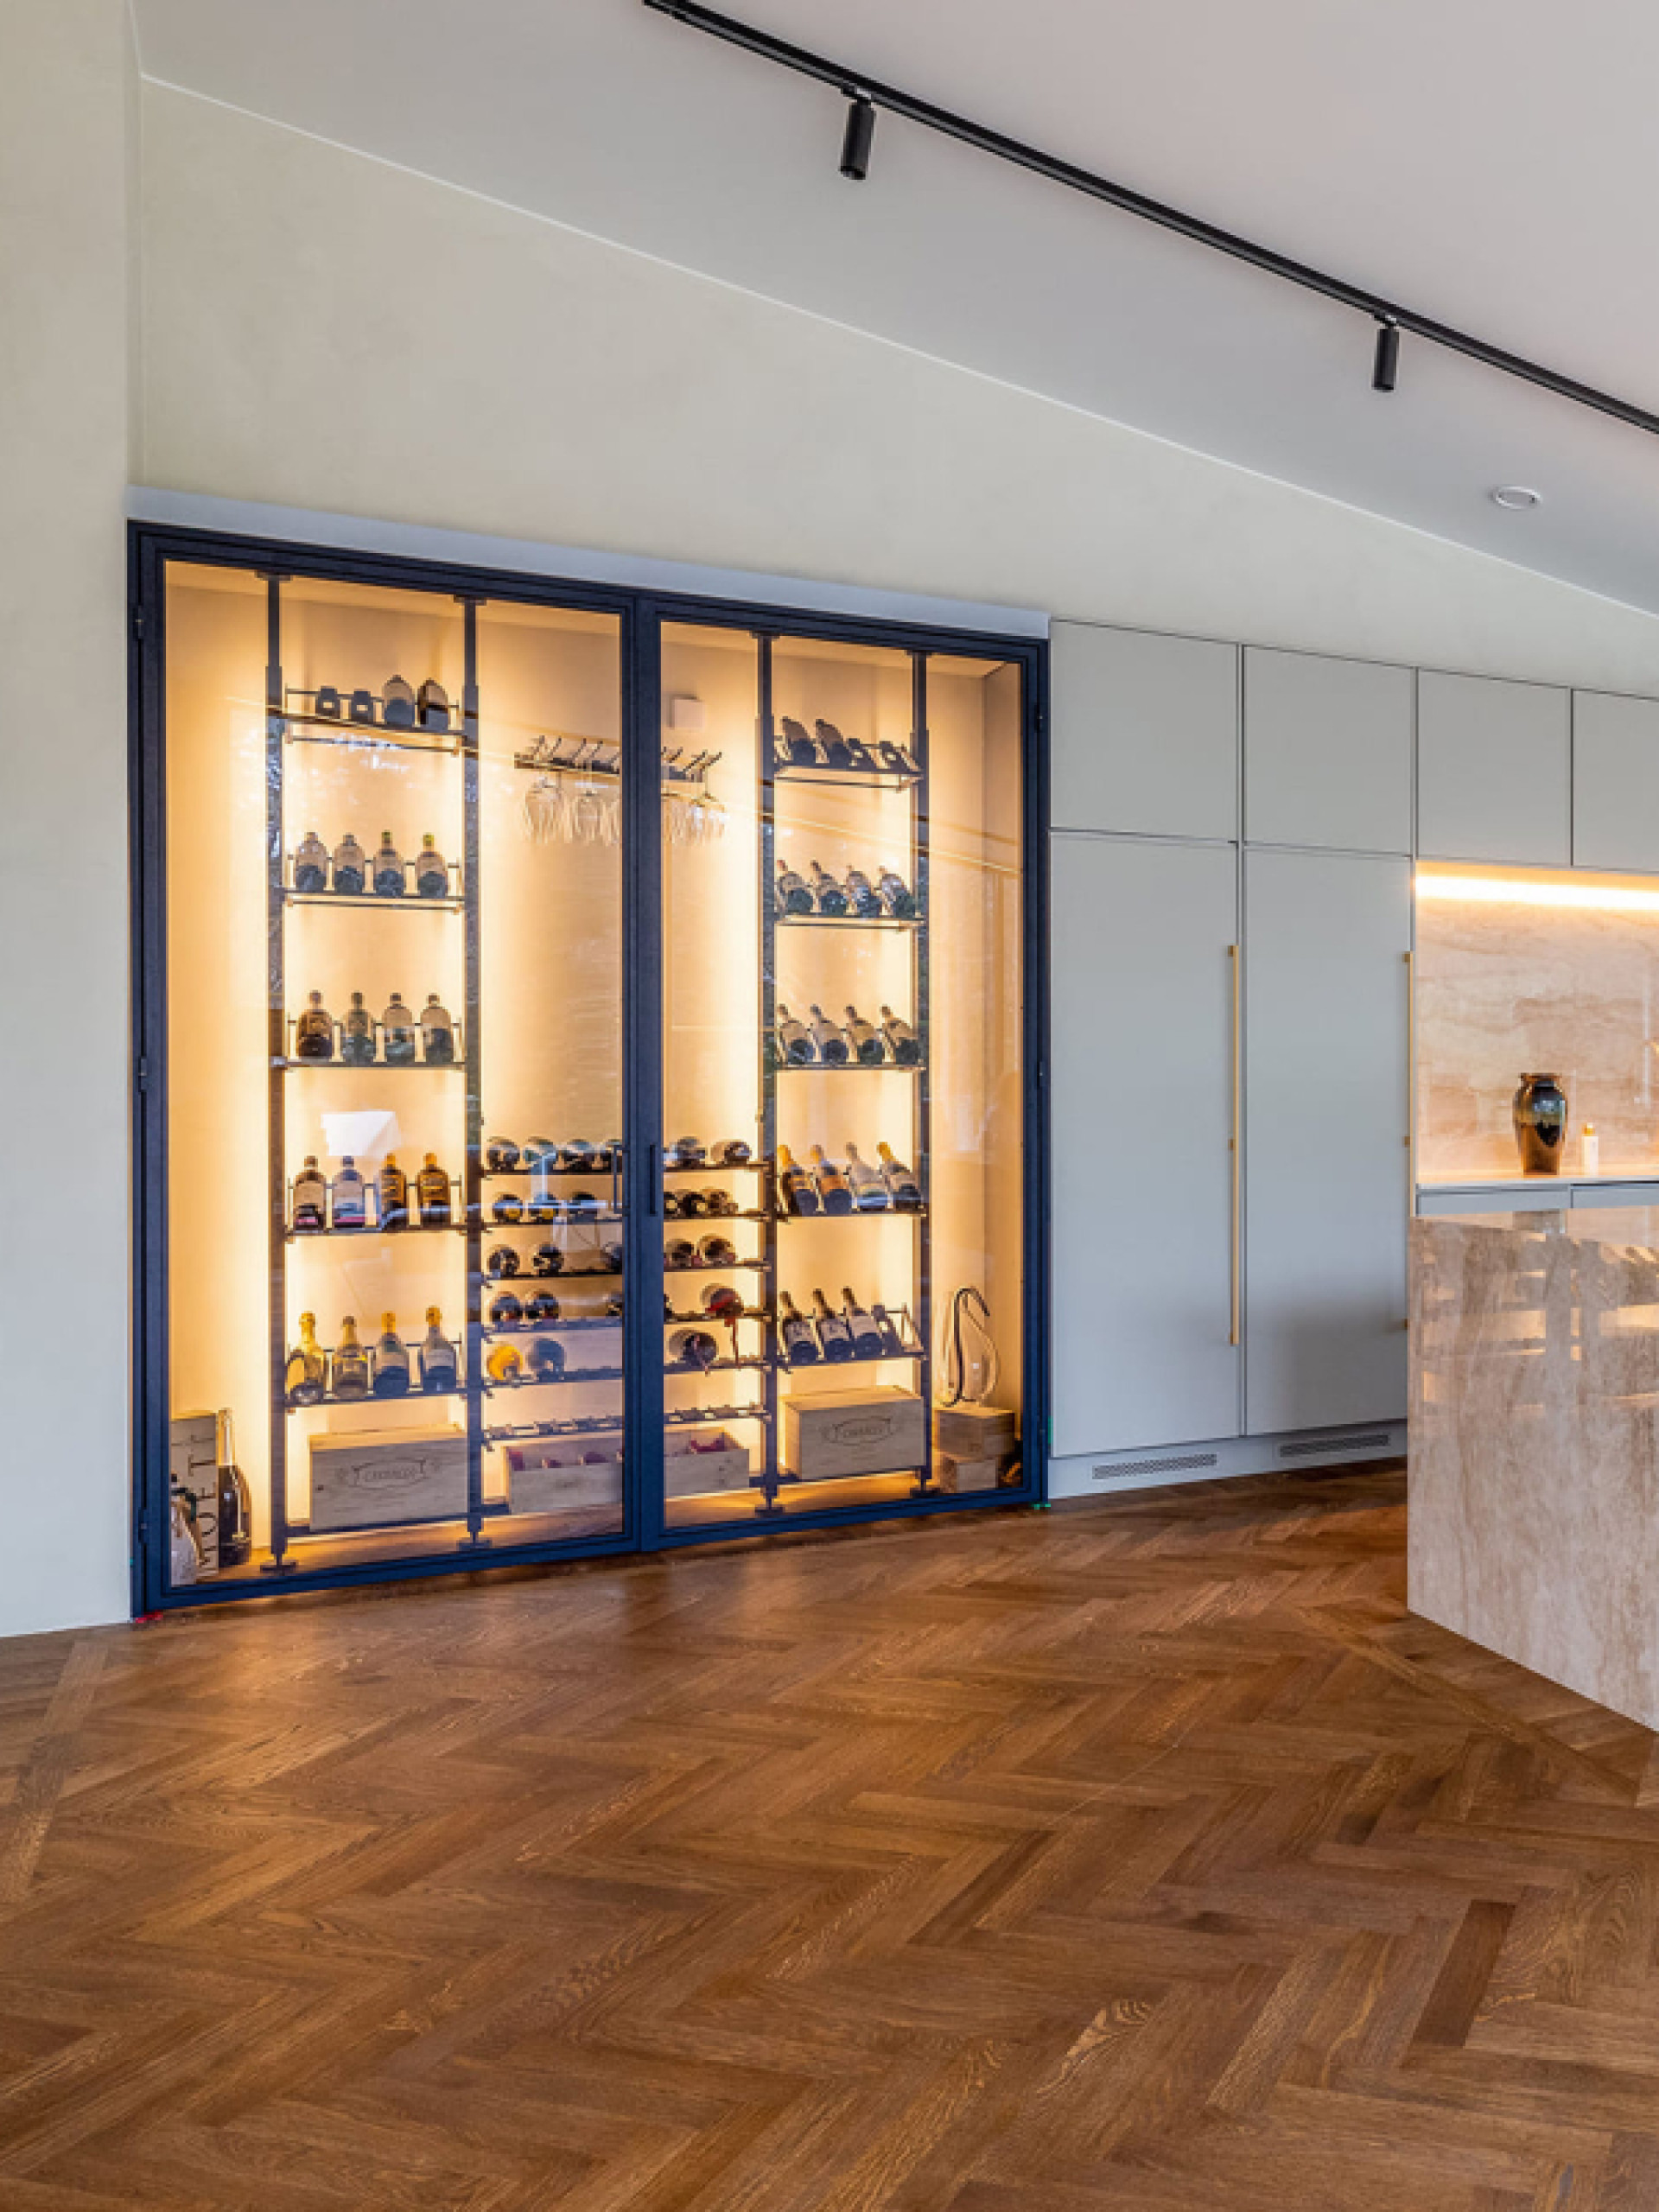 Example of a metal wine storage space embedded in a wall  in a luxury interior in Denmark